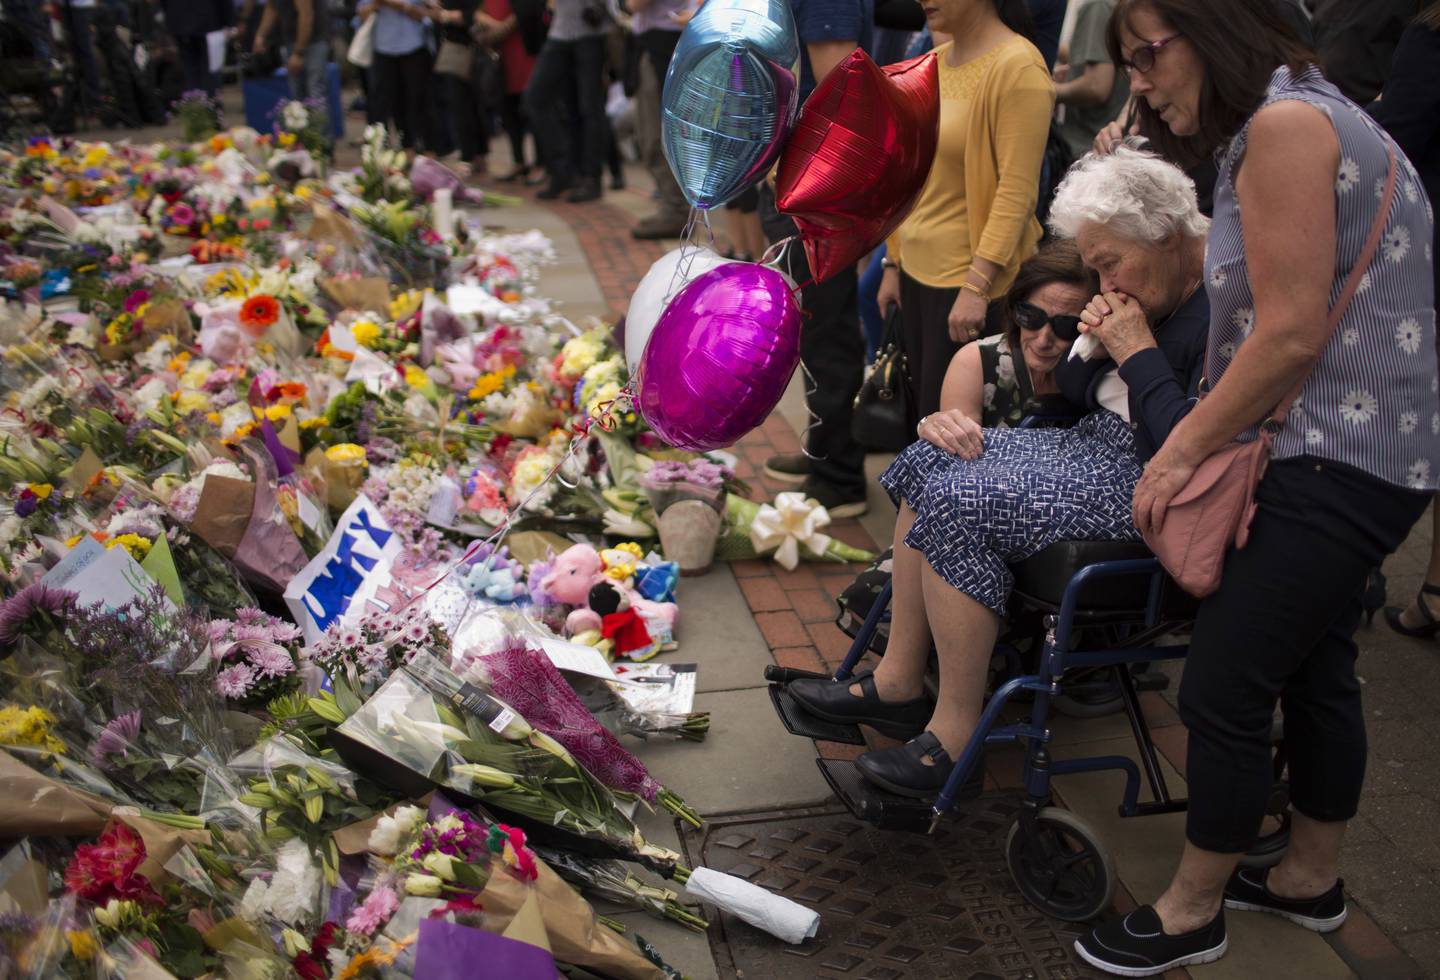 FILE - In this May 24, 2017 file photo women cry after placing flowers in a square in central Manchester, Britain, after the suicide attack at an Ariana Grande concert that left more than 20 people dead and many more injured, as it ended on Monday night at the Manchester Arena.